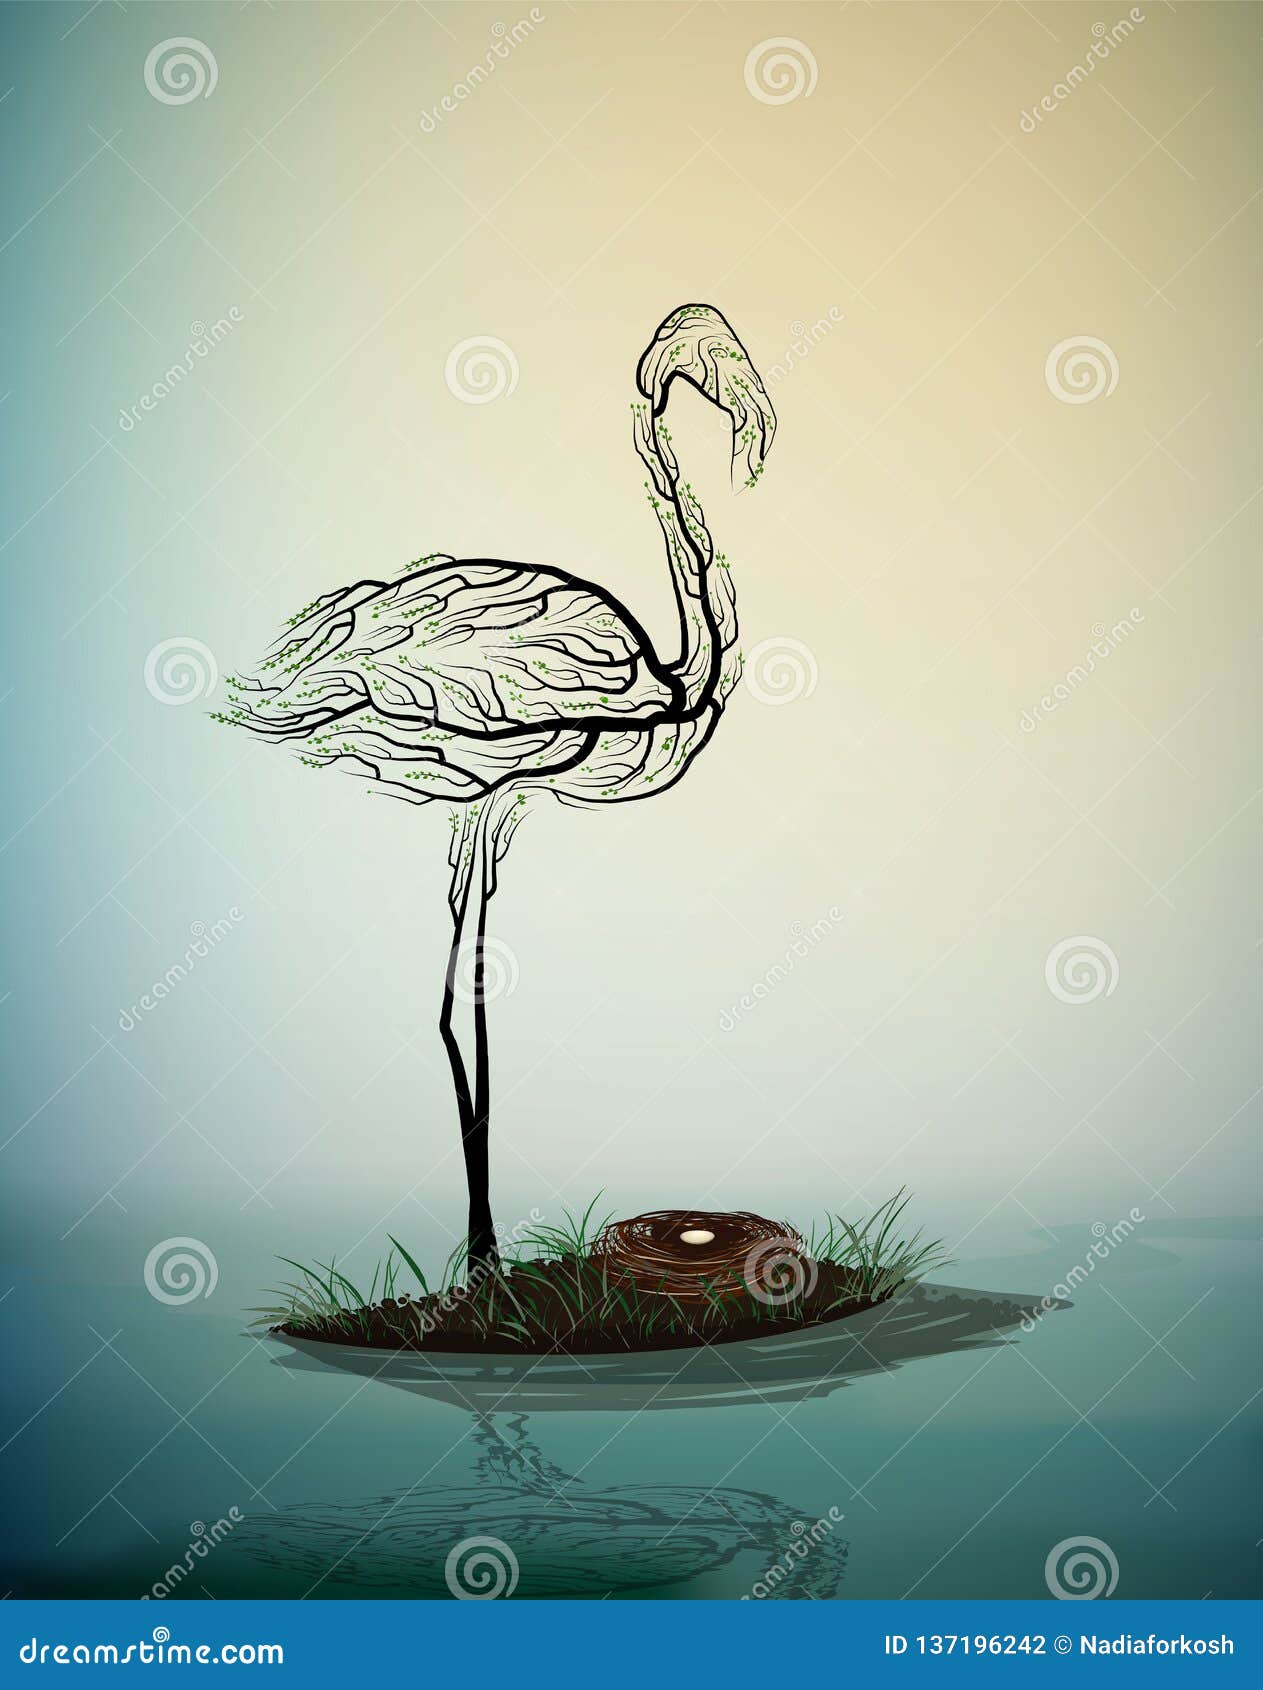 flamingo bird look like tree branches with the nest, birds extinction concept,